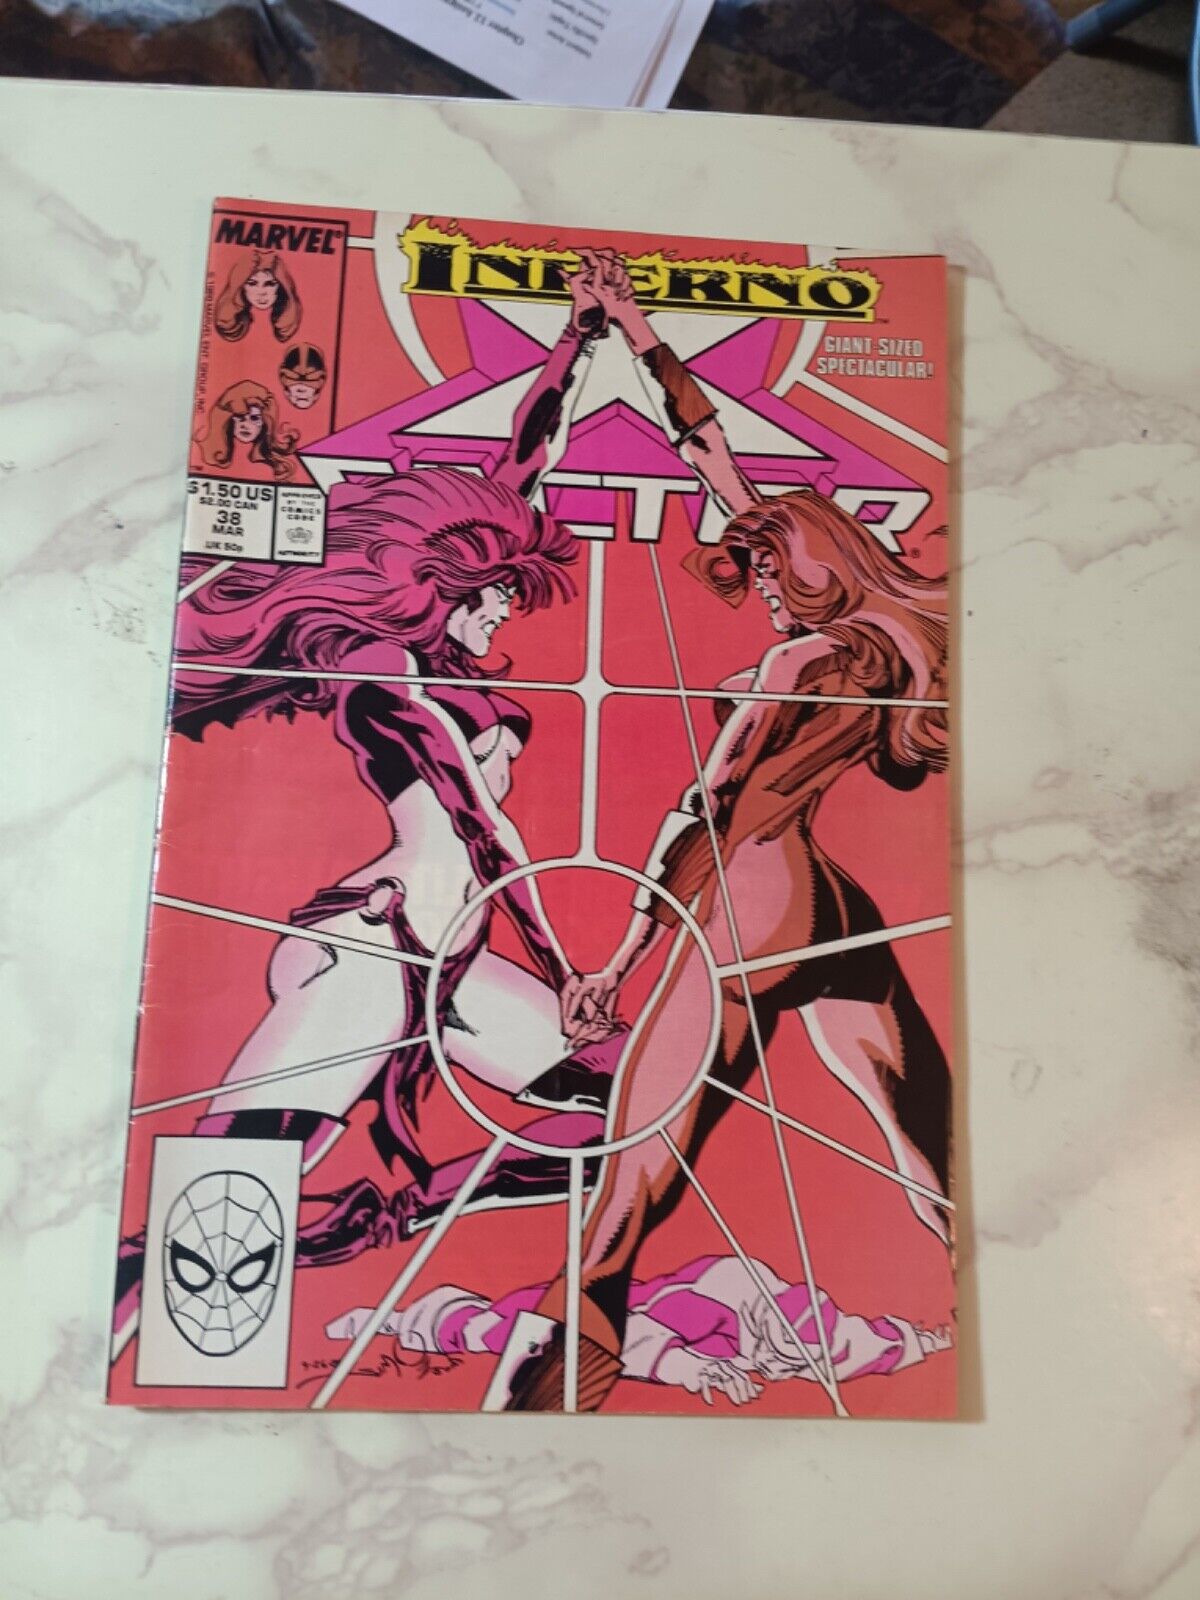 X-Factor #38 March 1989 Marvel Comics. Bagged & Boarded